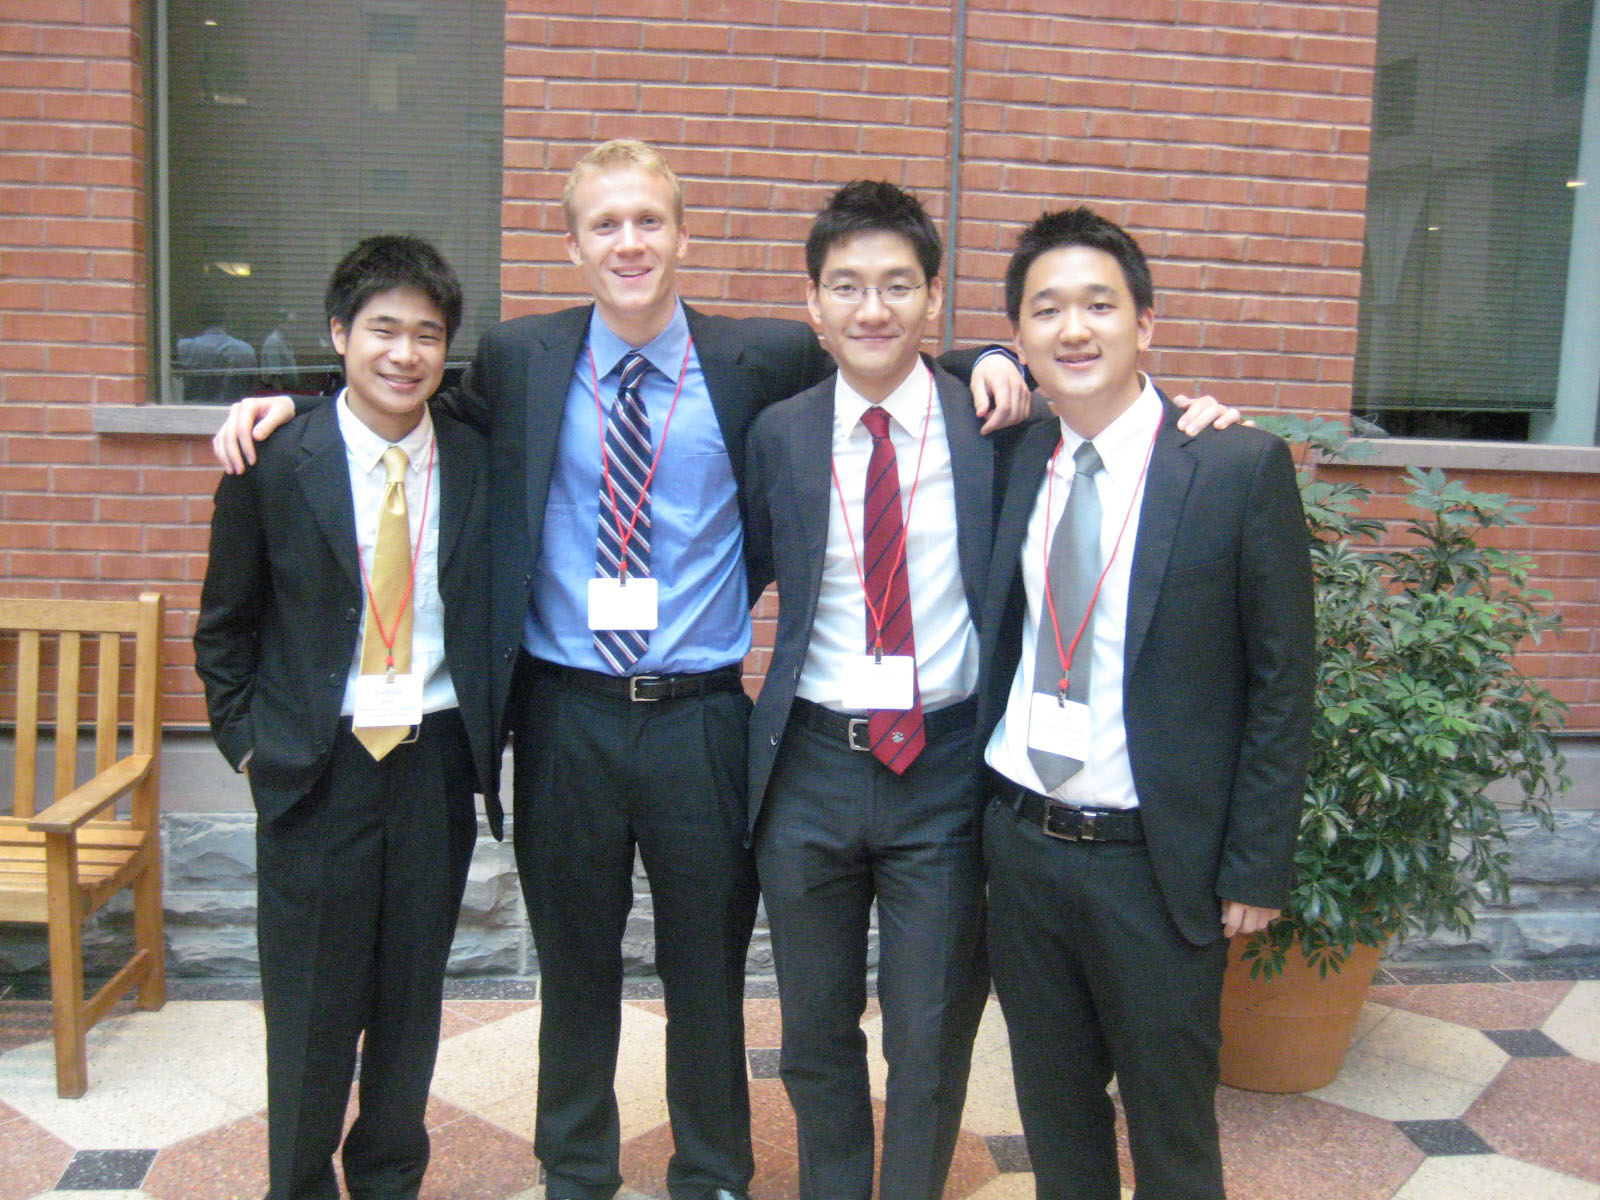 Group photo left to right: Nicholas Kaw, Christopher Rannefors, Yongjin Lee and Siravut Thammavaranucupt